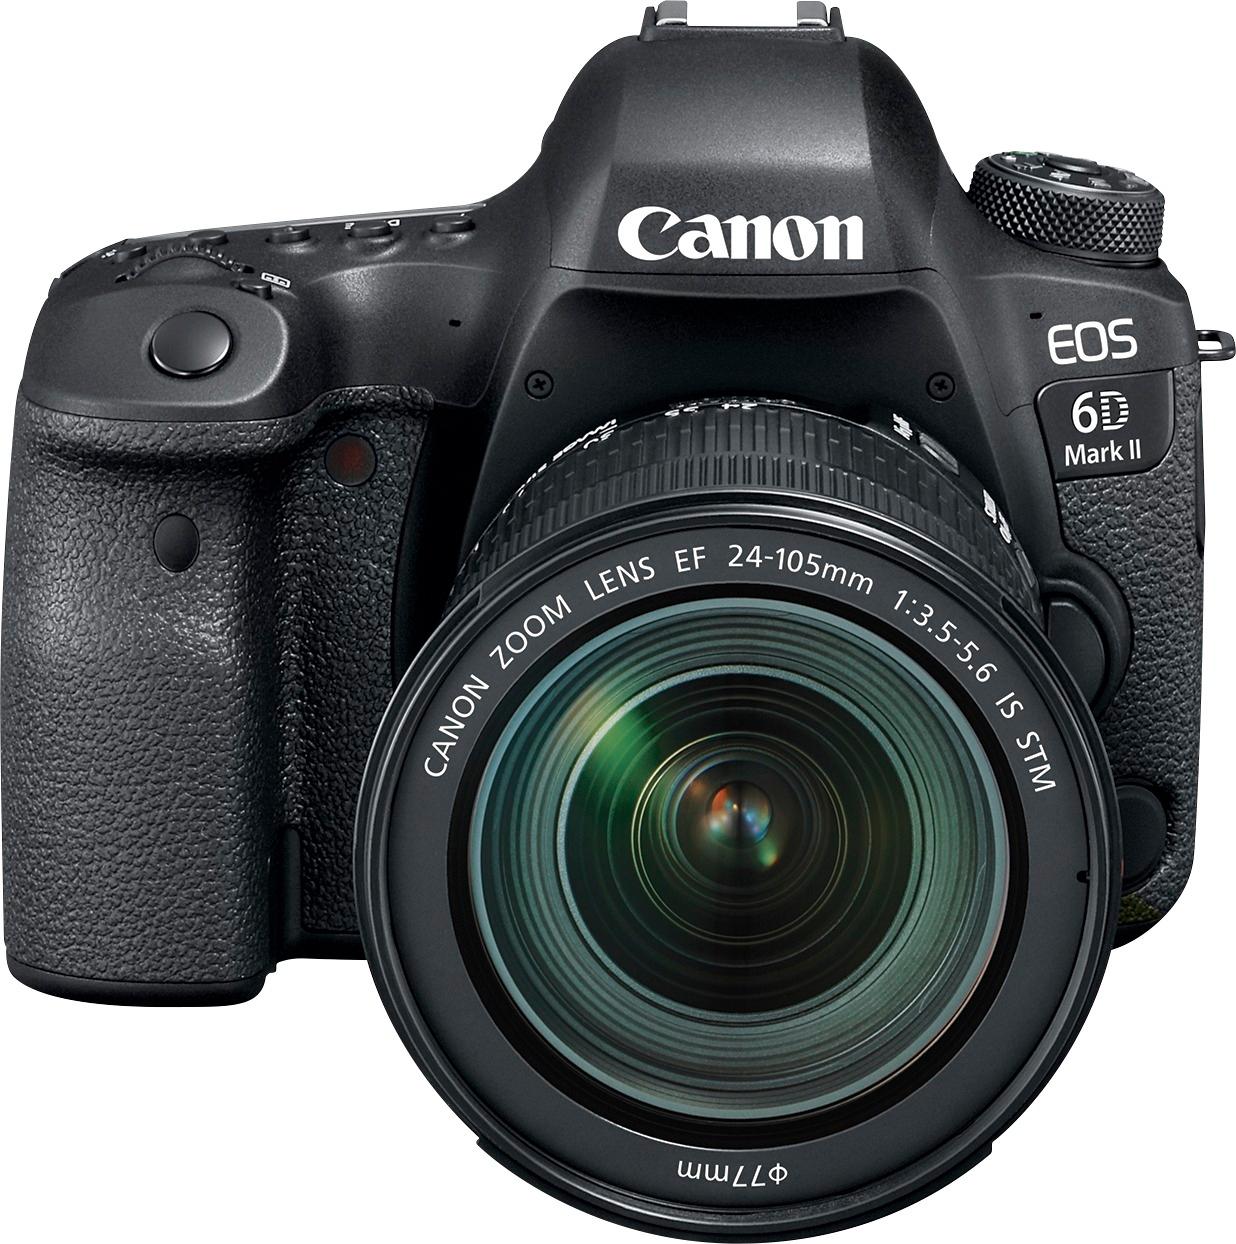 Customer Reviews: Canon EOS 6D Mark II DSLR Camera with EF 24-105mm f/3 ...